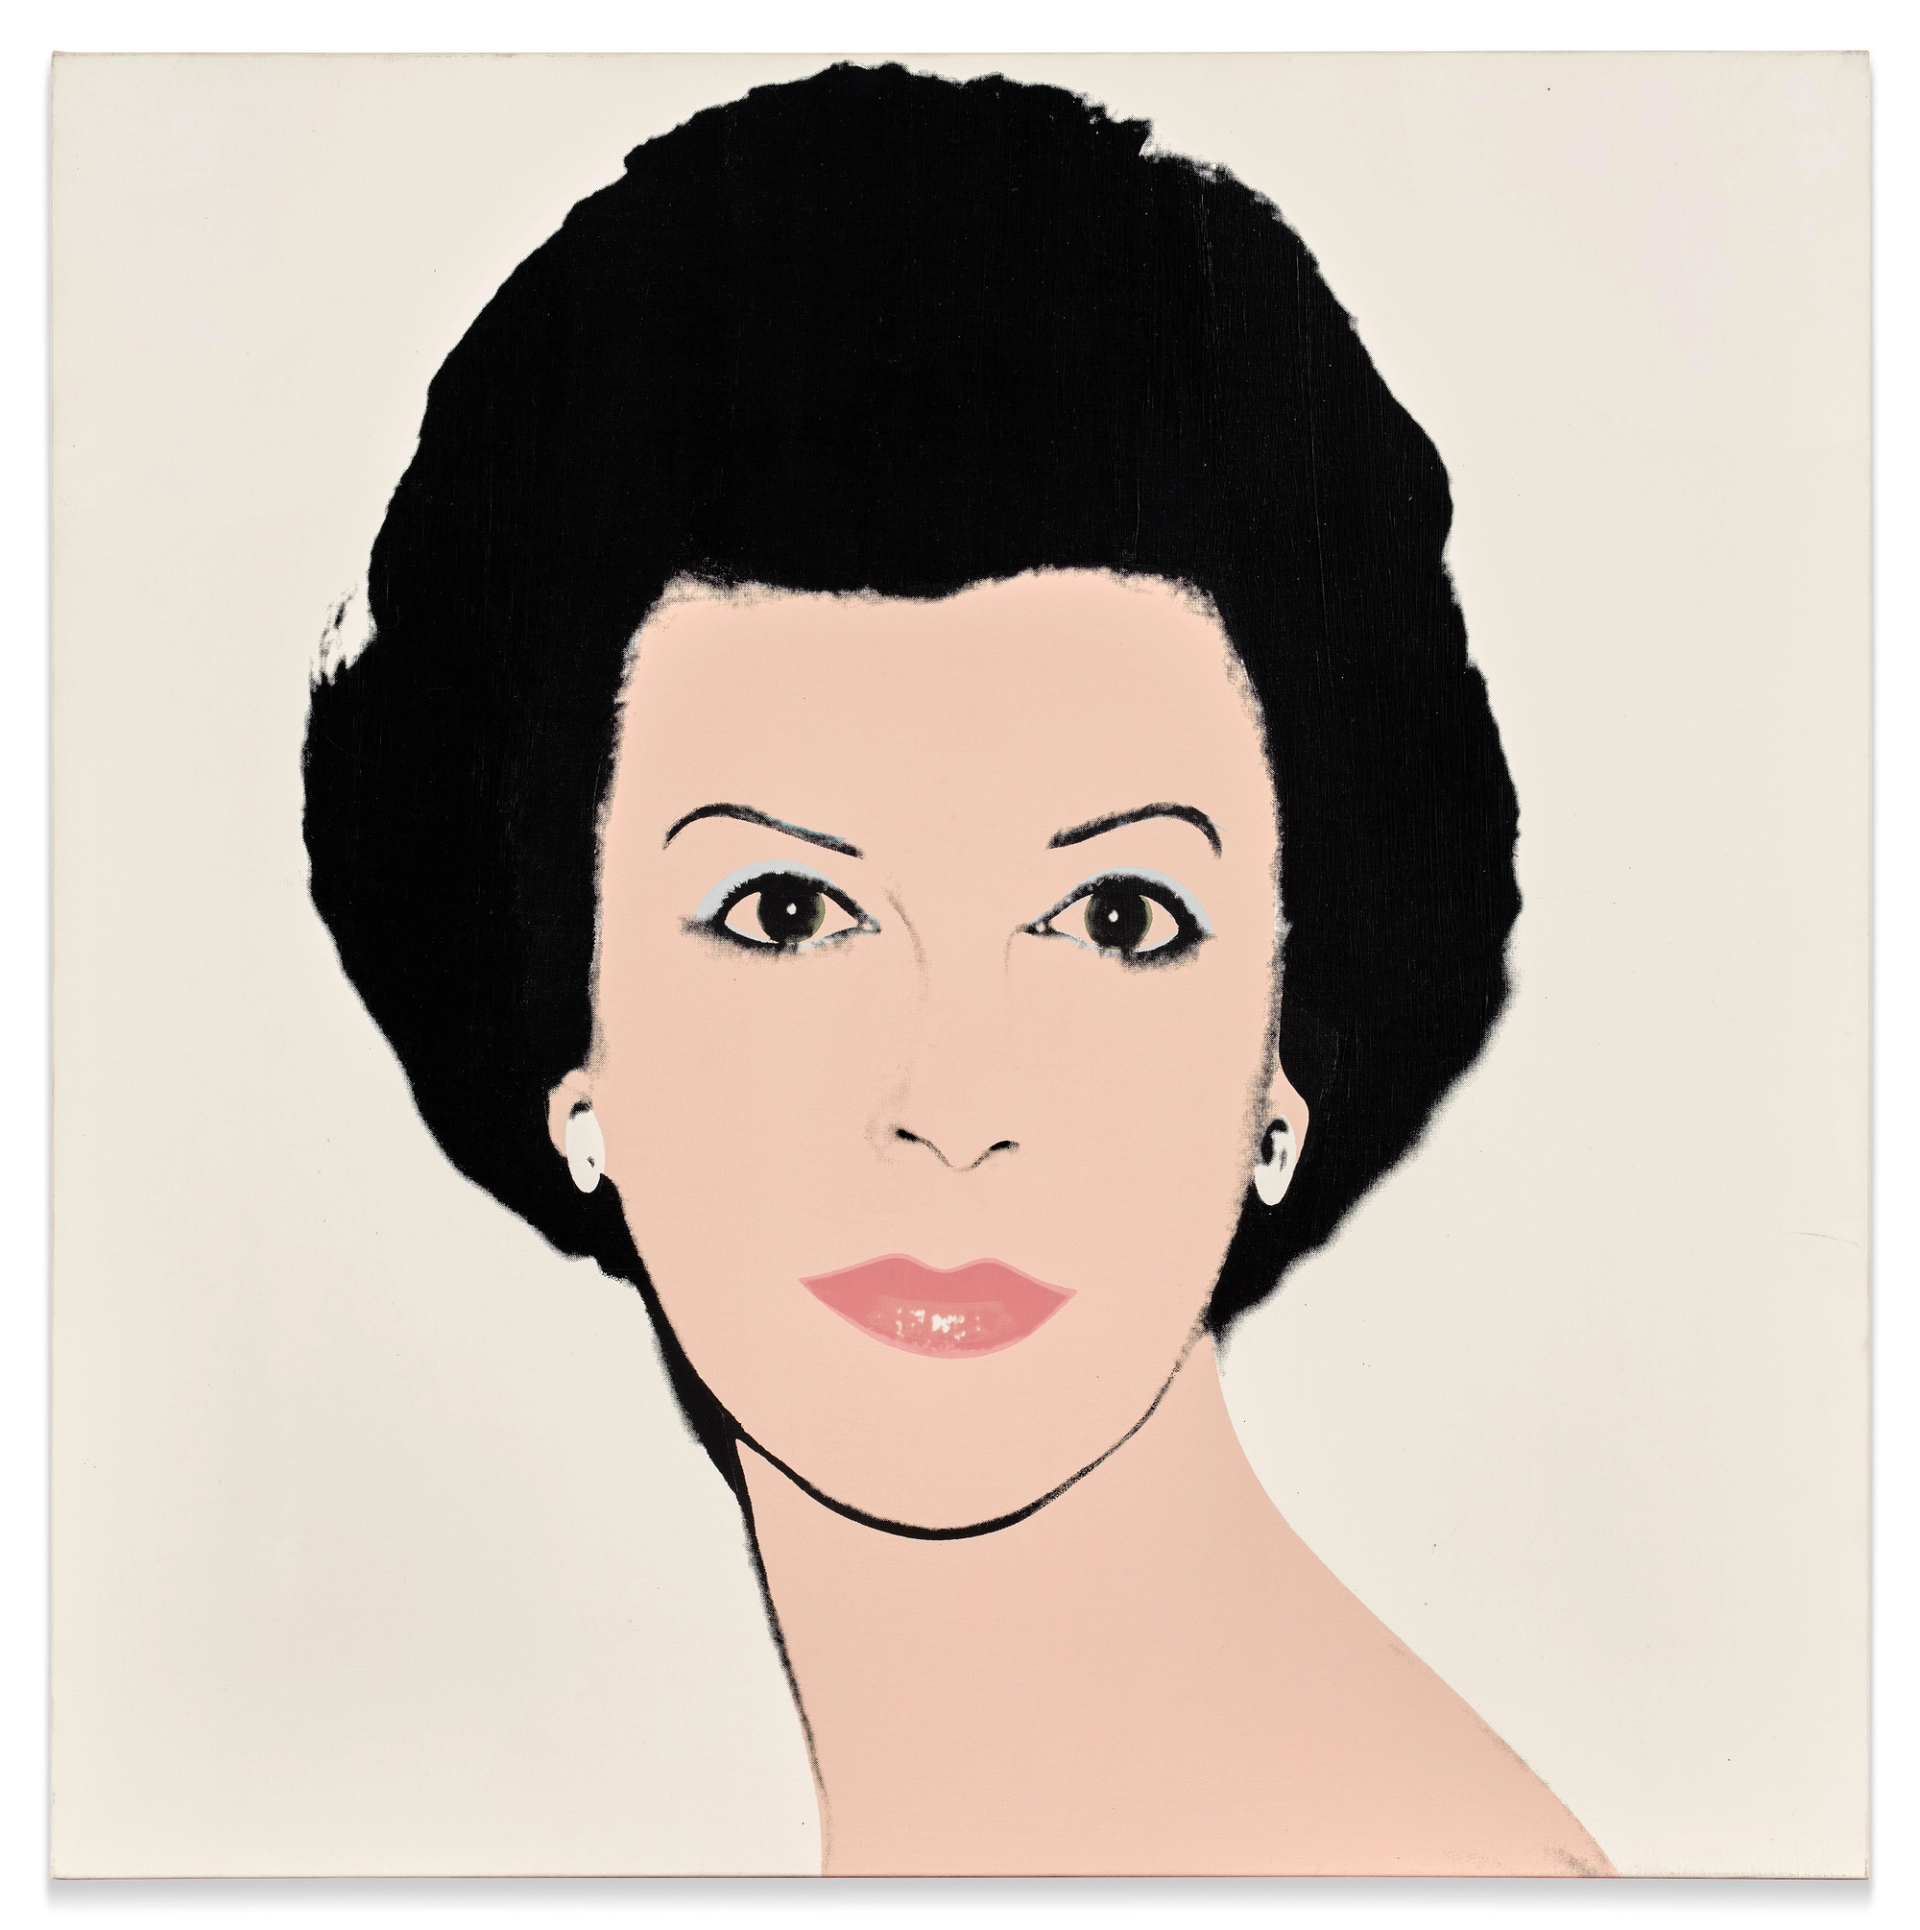 A portrait of Emily Fisher Landau by Andy Warhol. It shows the heiress depicted in Warhol's characteristically graphic style against a white background.